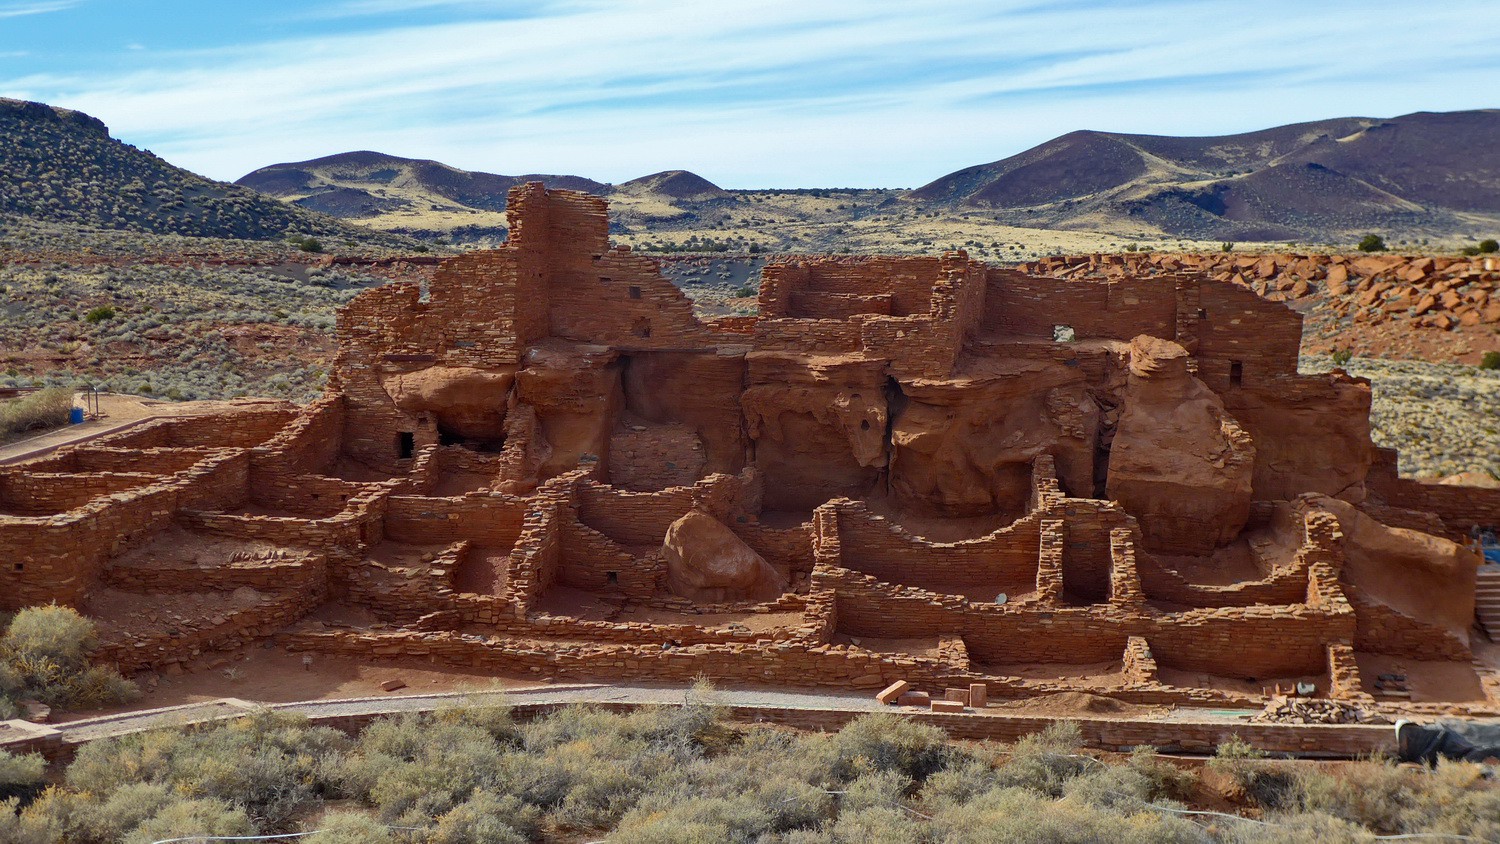 Wupatki Pueblo, built and occupied during the 1100s